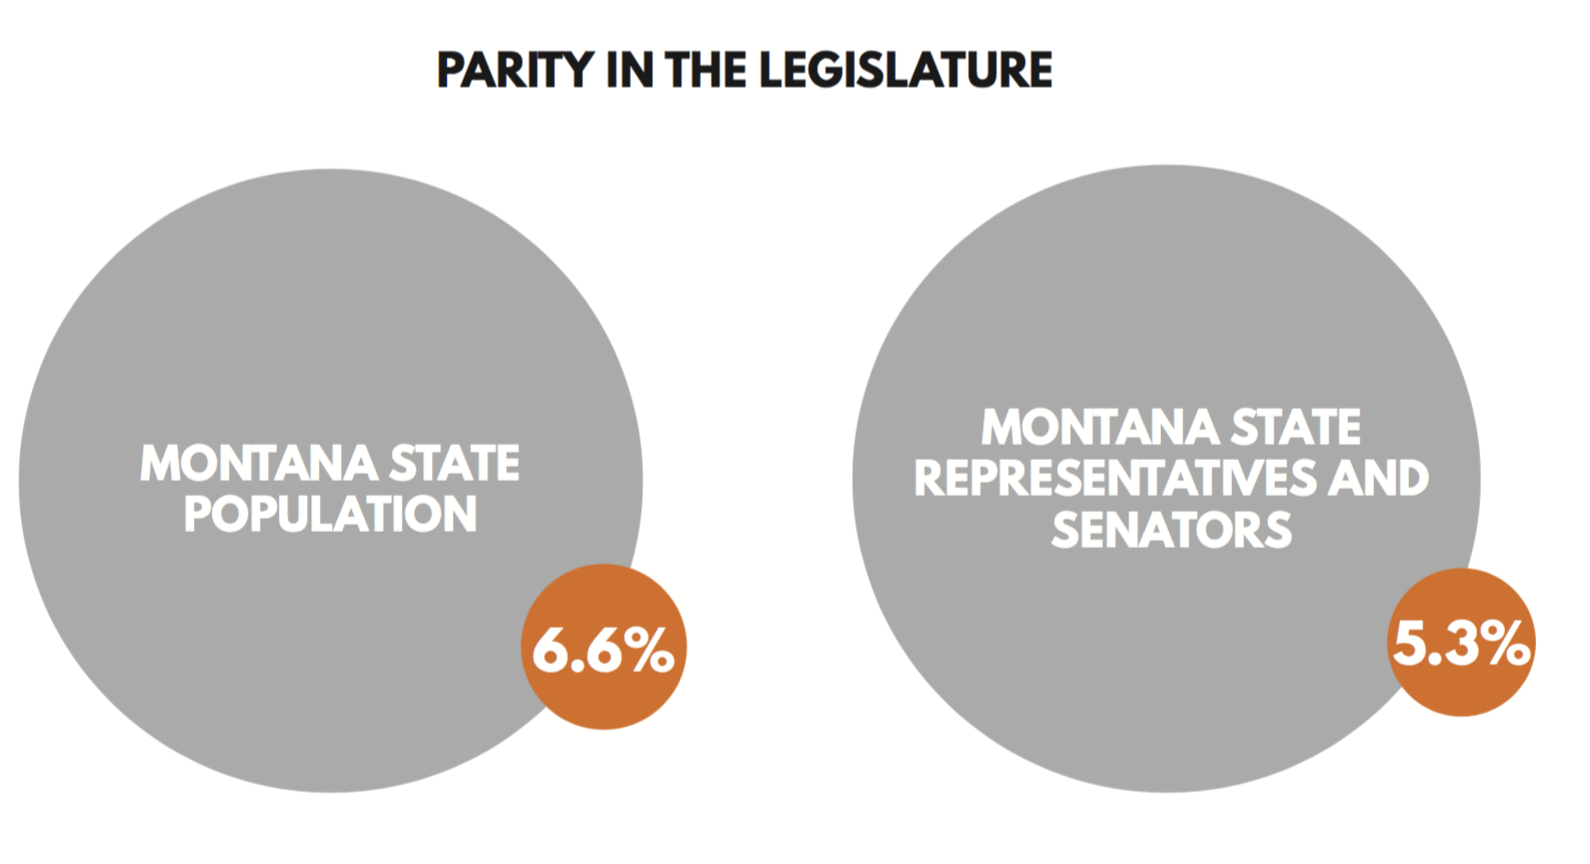 Native Americans make up Montana's largest minority group, accounting for 6.6 percent of the state's 1,023,579 total population in July 2014. The legislature almost re ects that. Eight of Montana's current 150 state representatives and senators, or 5.3 percent, identify as American Indian. Source: State of Montana legislature data, 2015- 2016, and U.S. Census Bureau